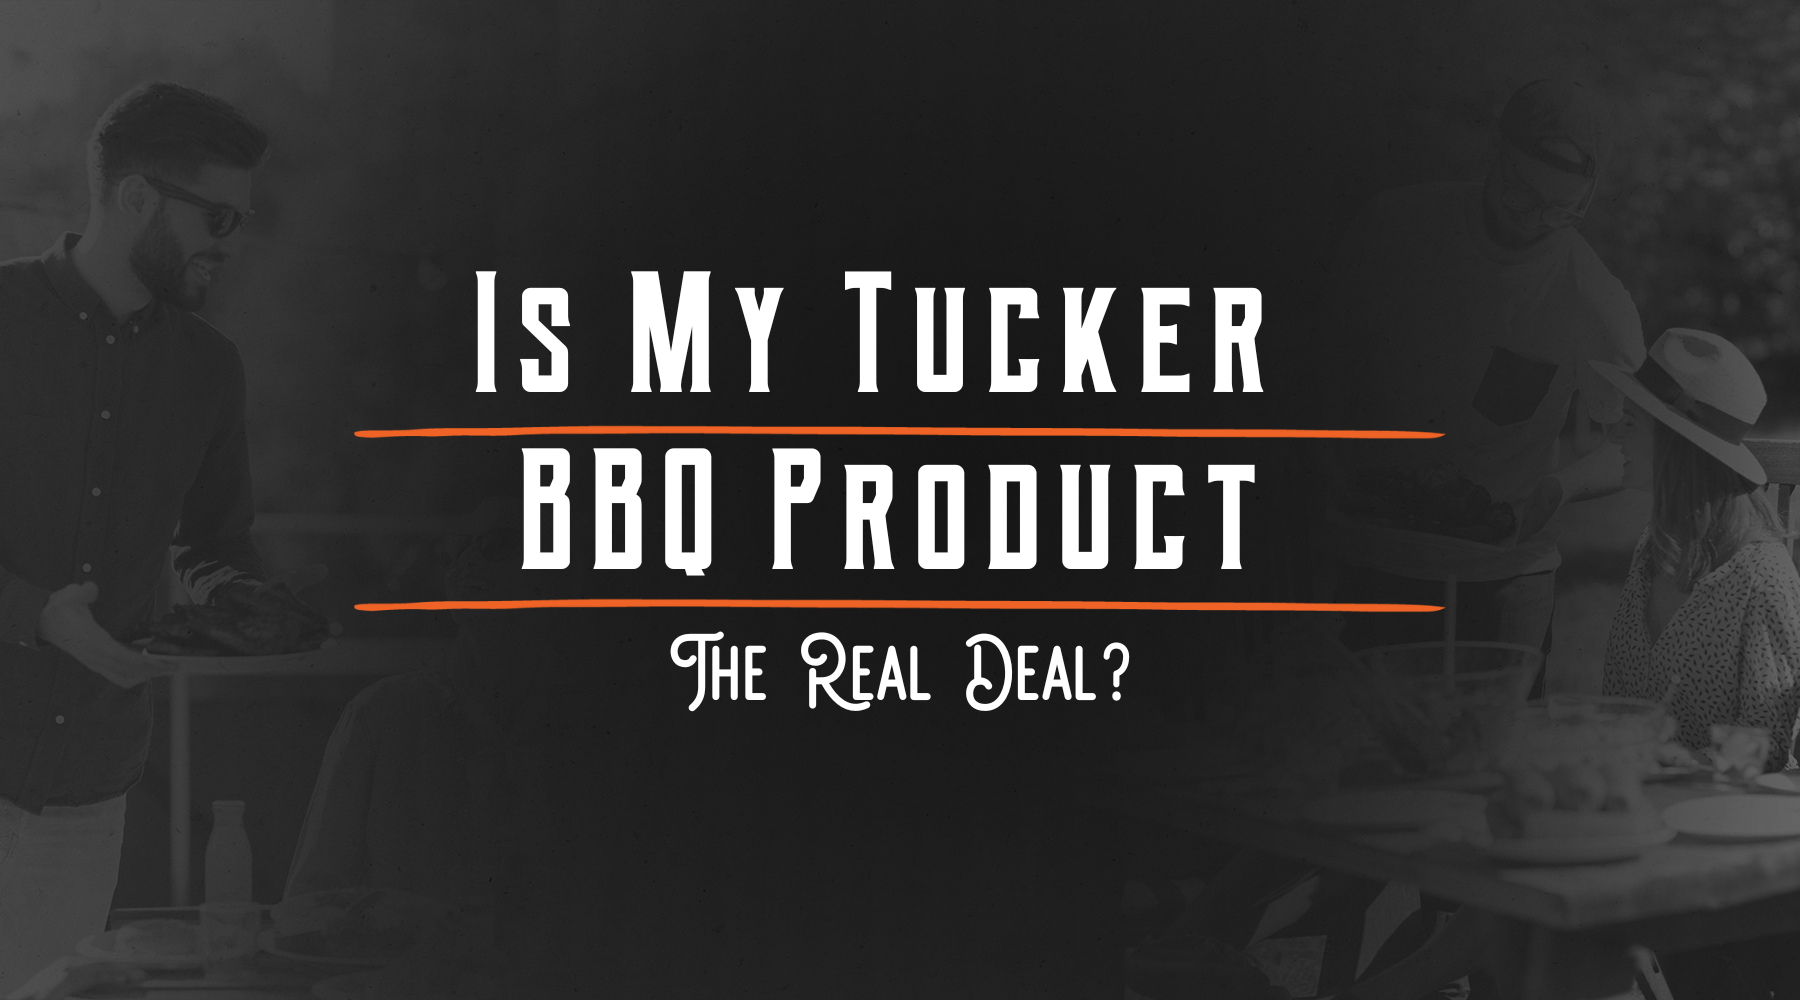 How do you know that your Tucker BBQ is the real deal?